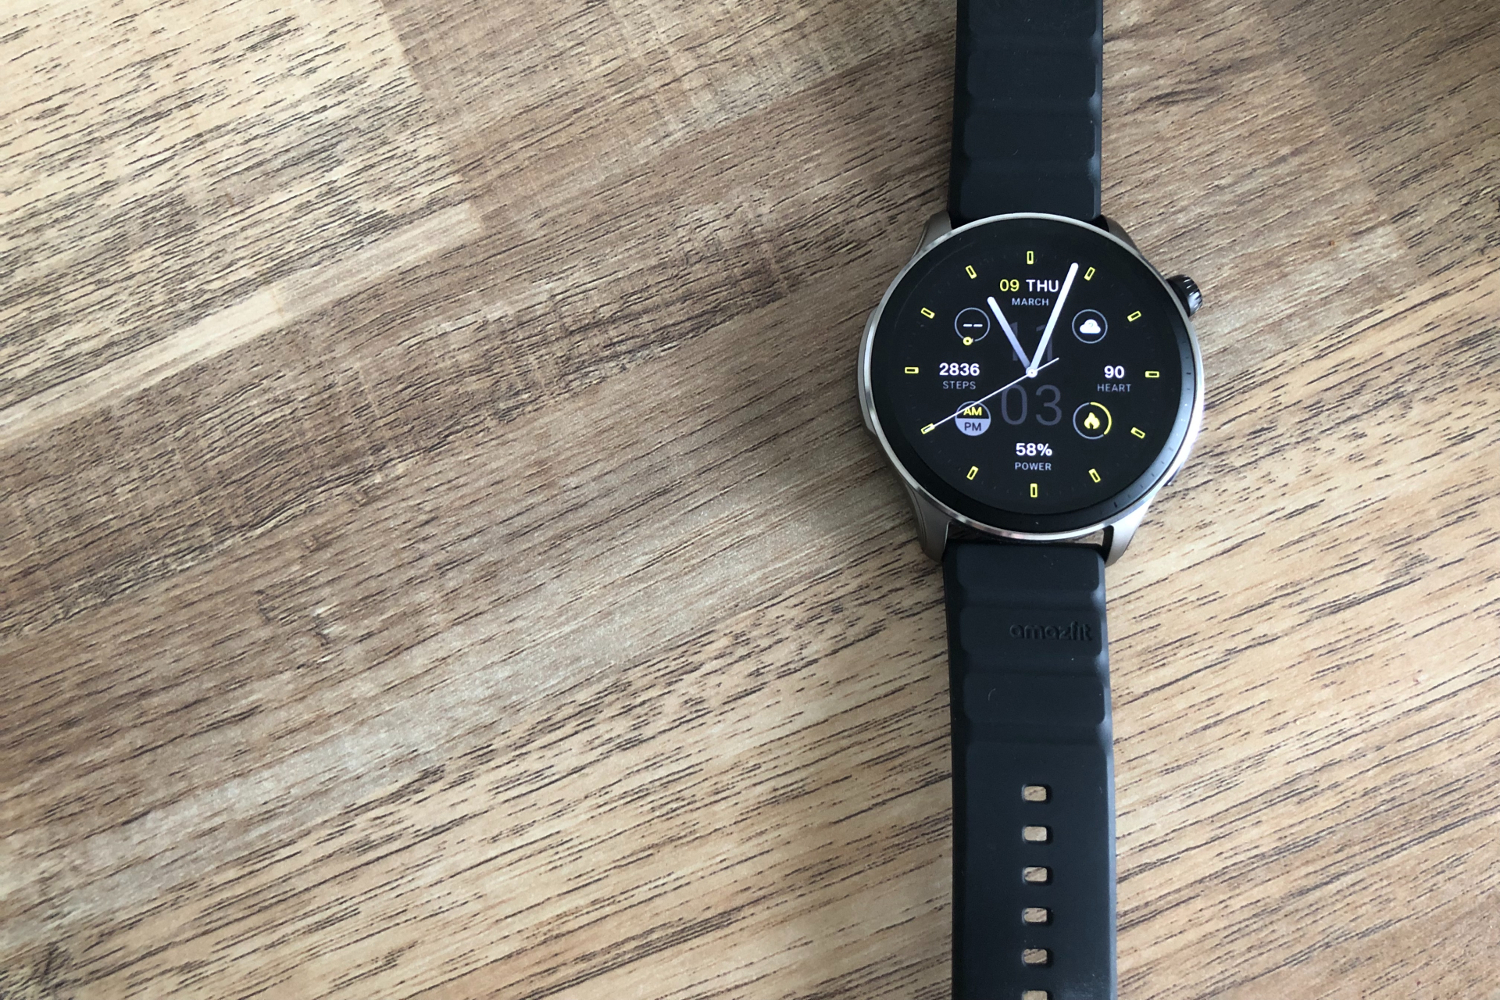 Amazfit GTR 4 Review: A Feature-Packed Smartwatch That Offers Good Value